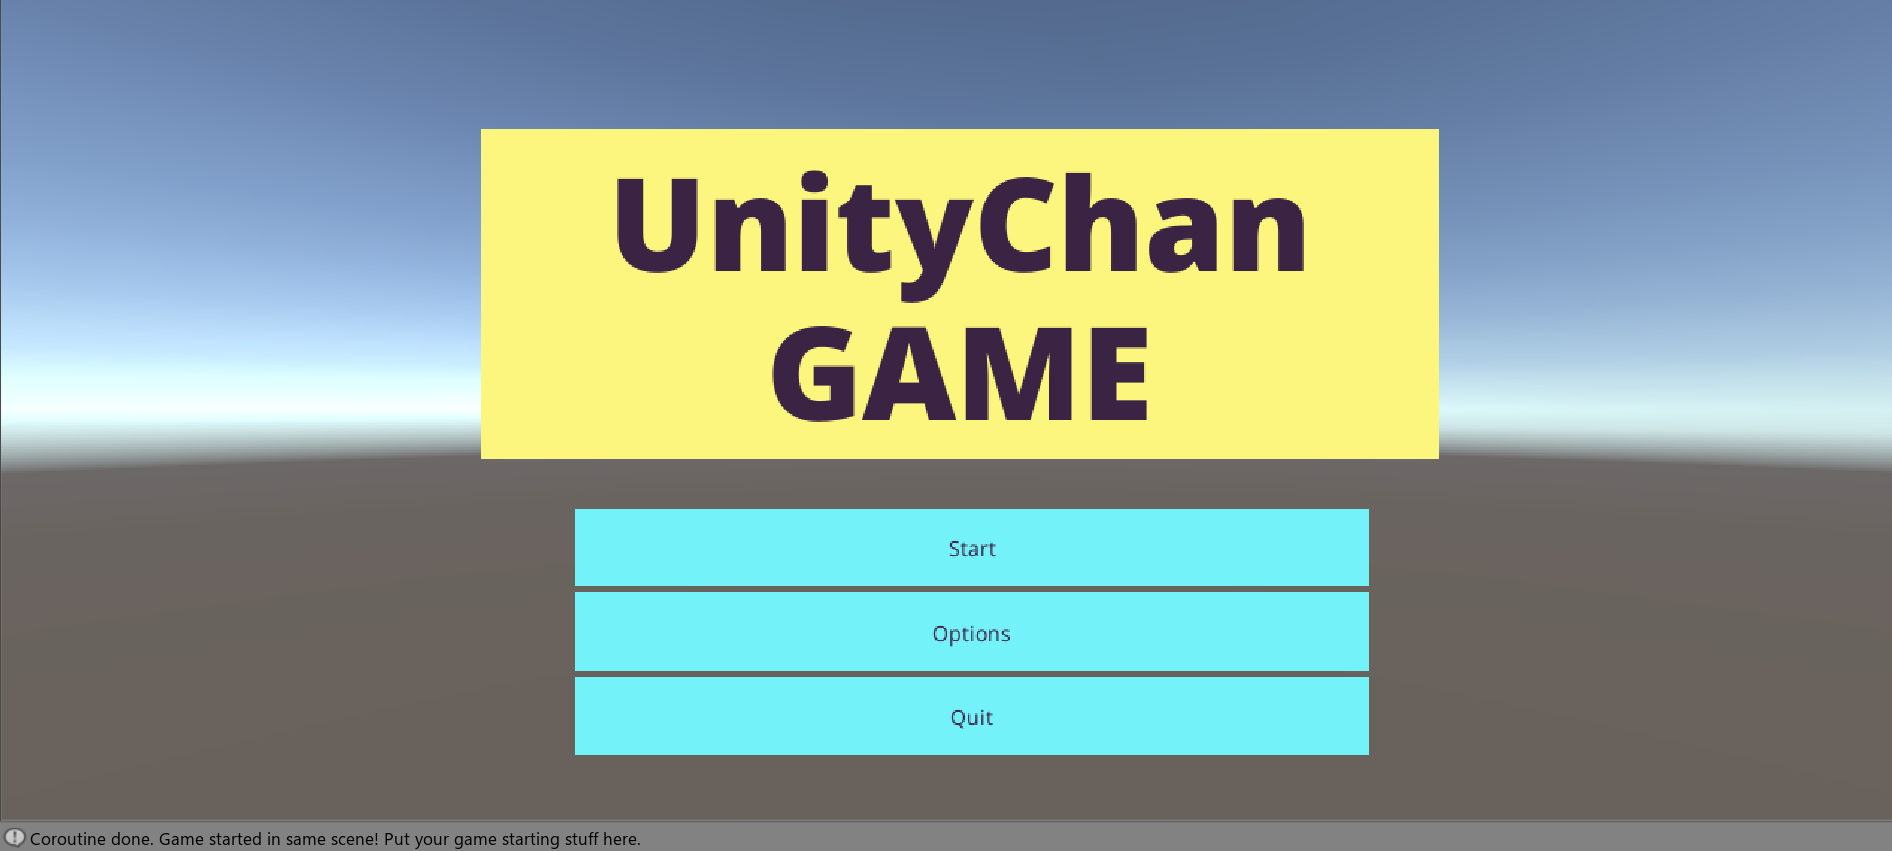 Unity Chan Game